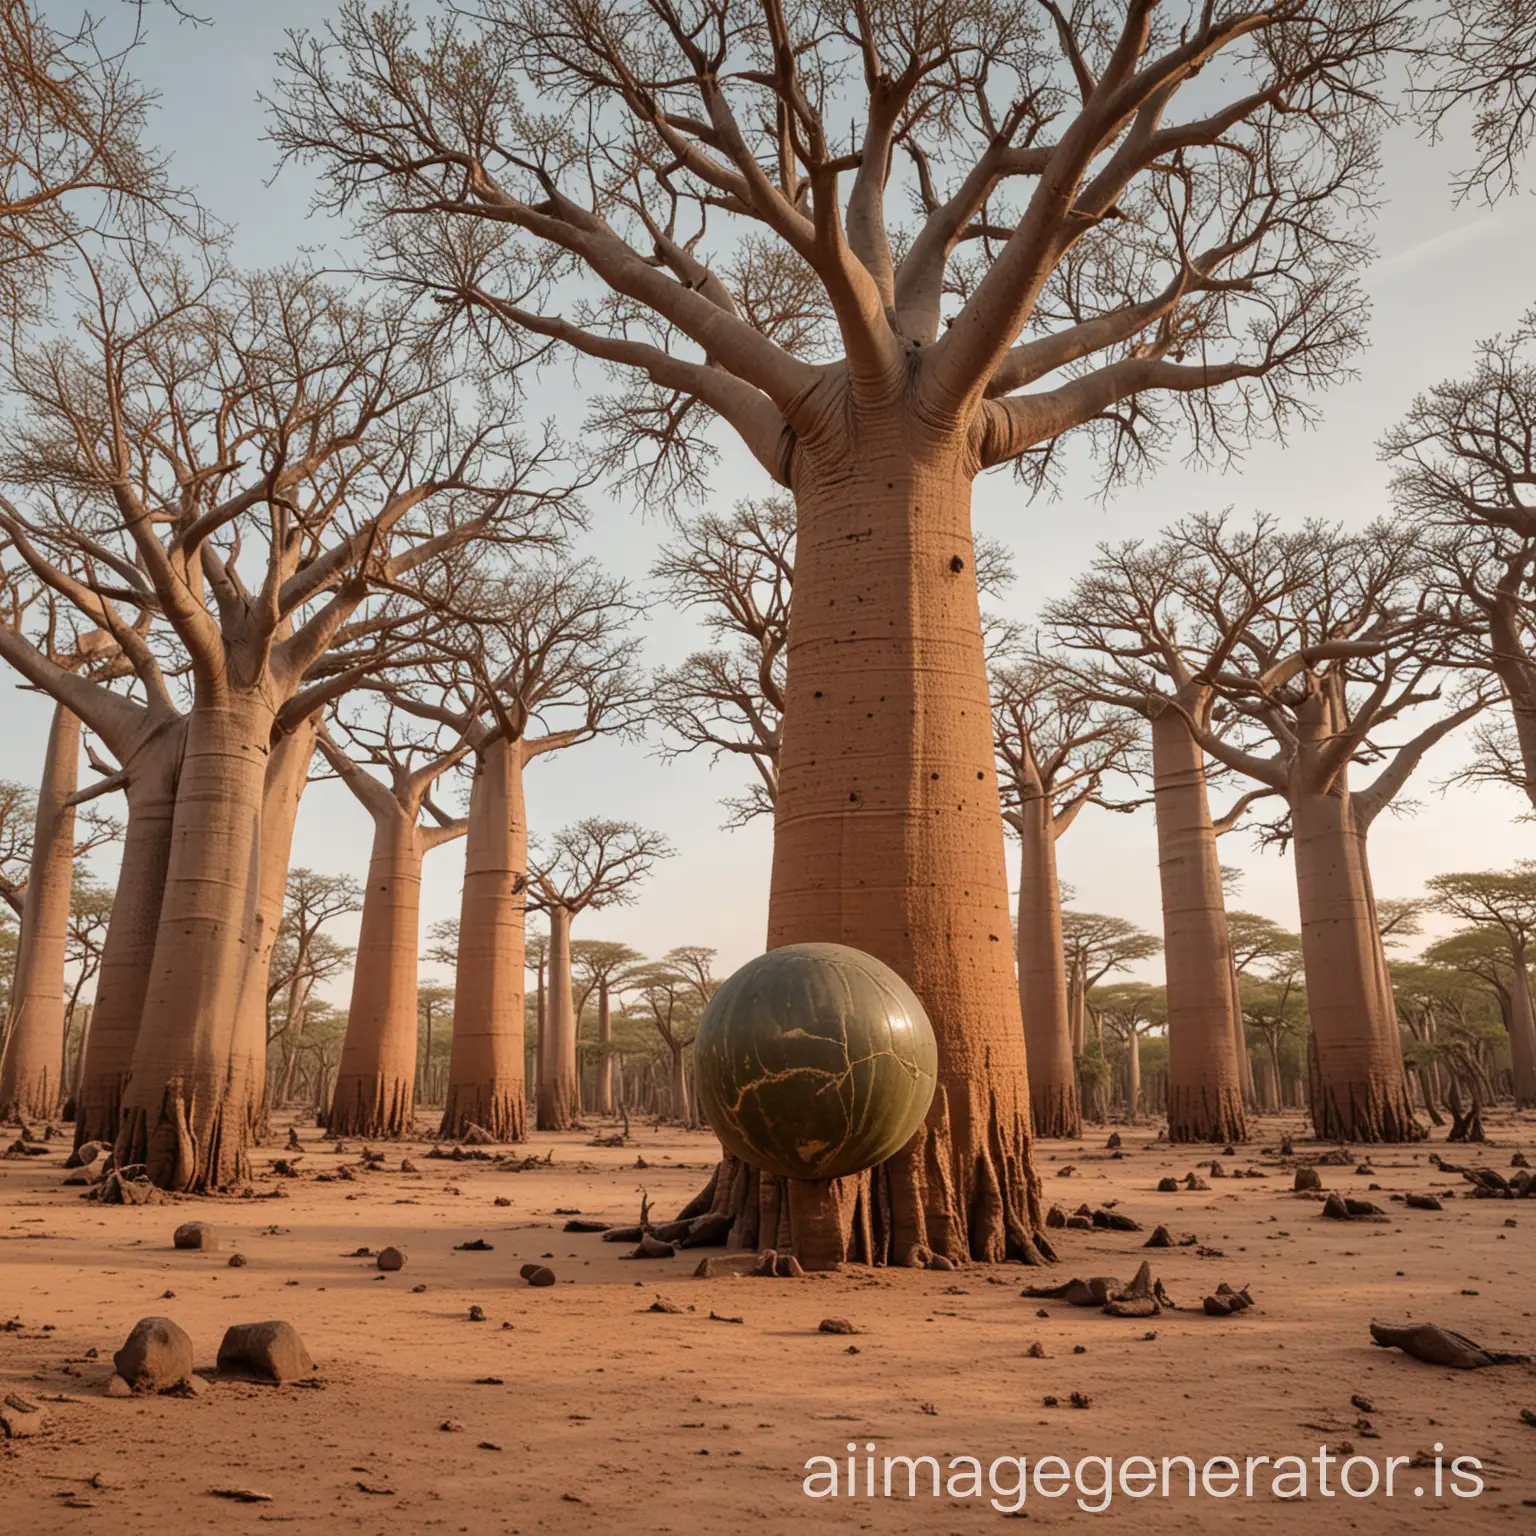 
a baobab forest, seen from the camera close to the ground with a sphere in the foreground of the camera
light sunset